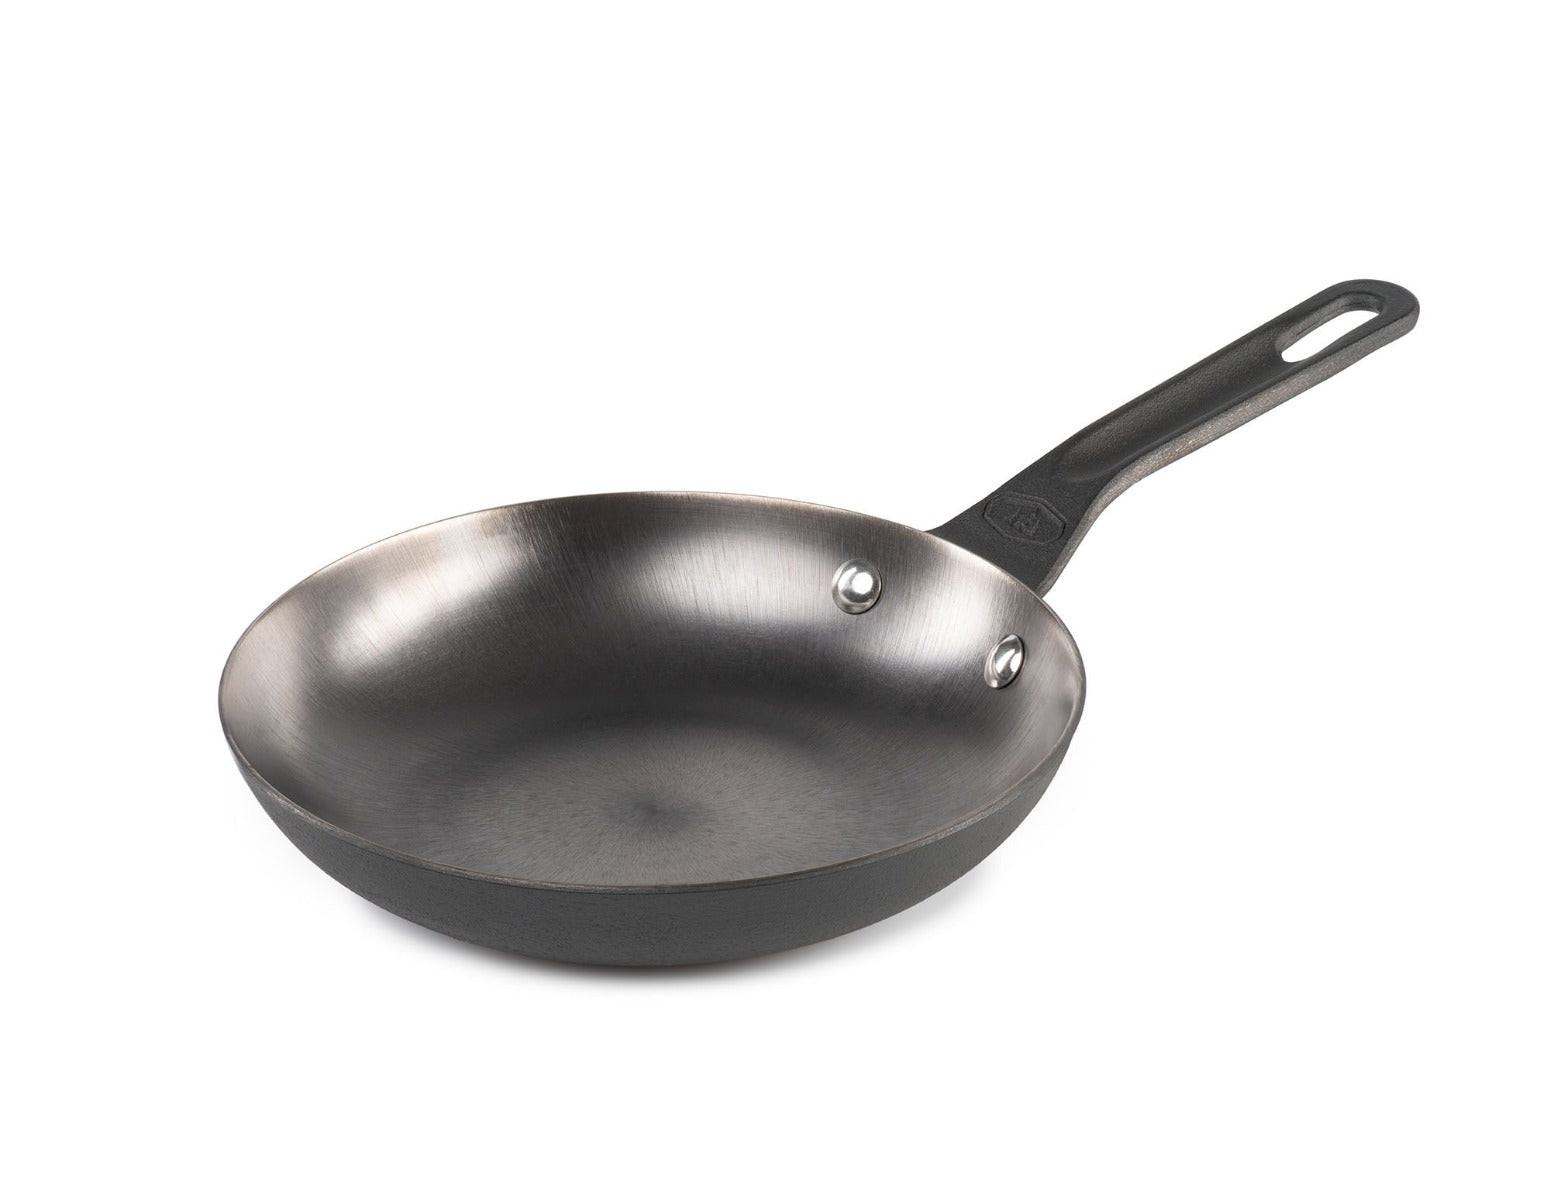 All-Clad 8 Inch Fry Pan